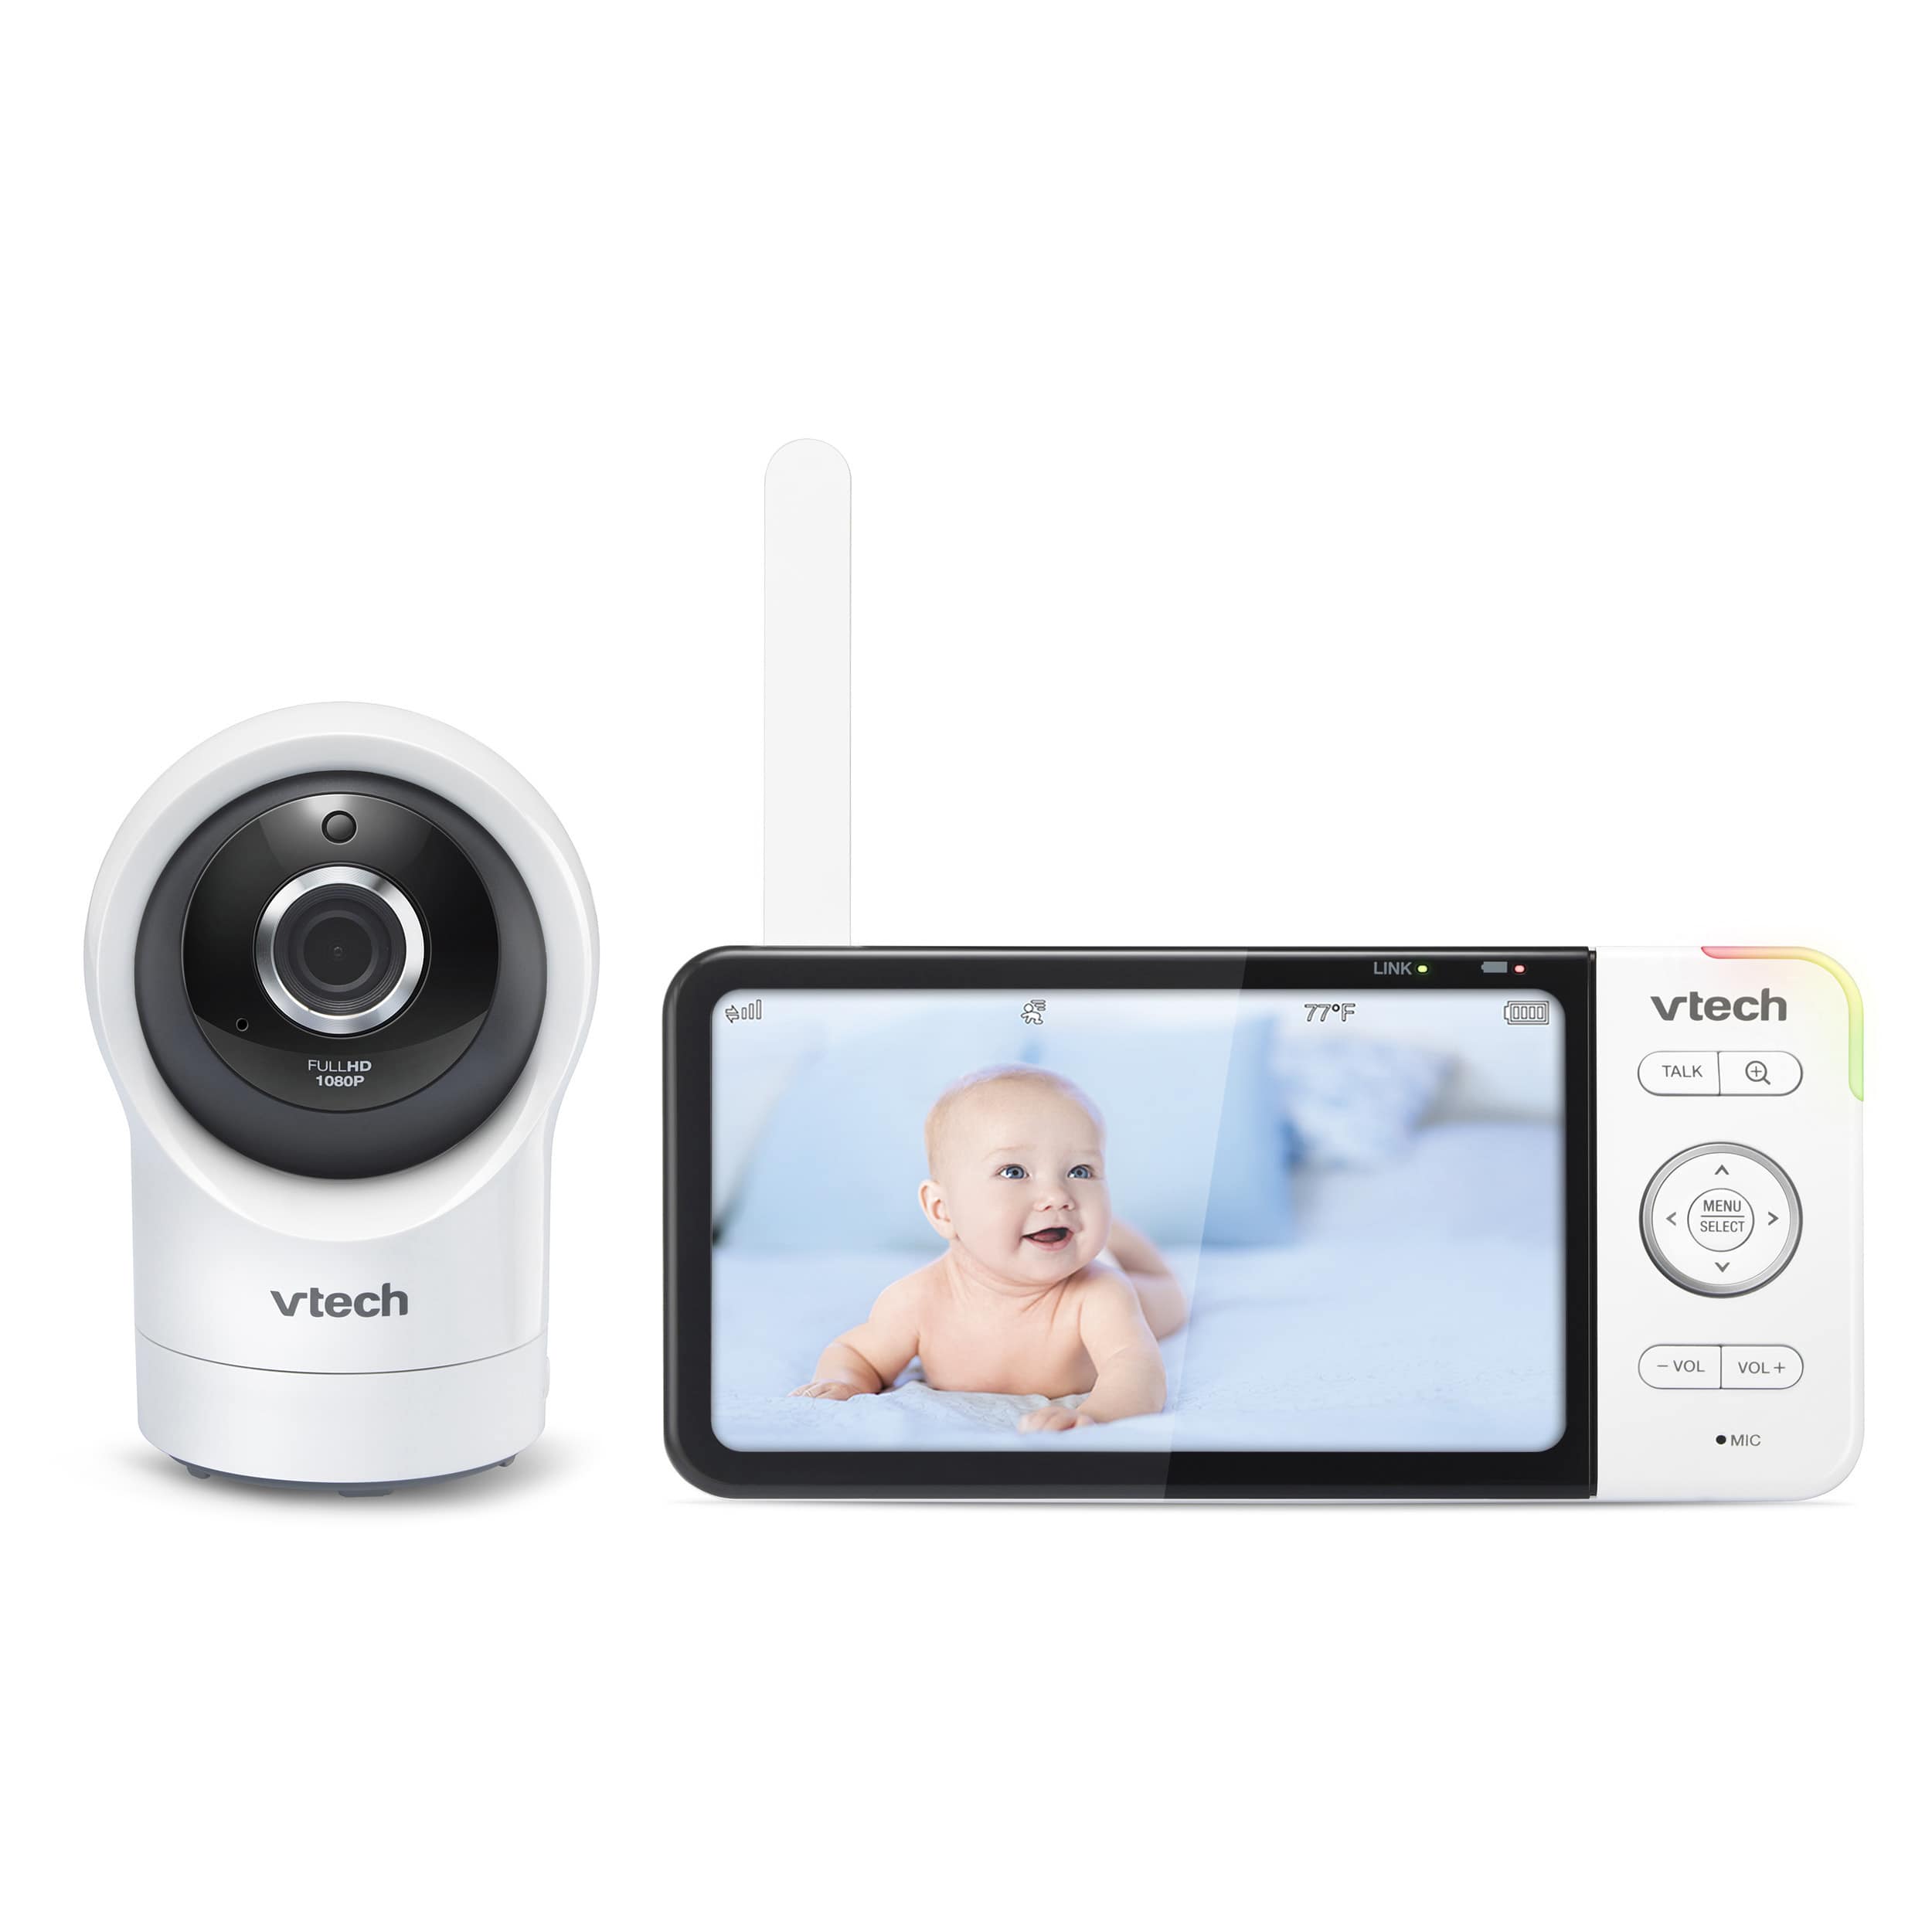 Wi-Fi Remote Access Camera Video Baby Monitor with 5" display and 1080p HD 360 degree Panoramic Viewing Pan & Tilt Camera